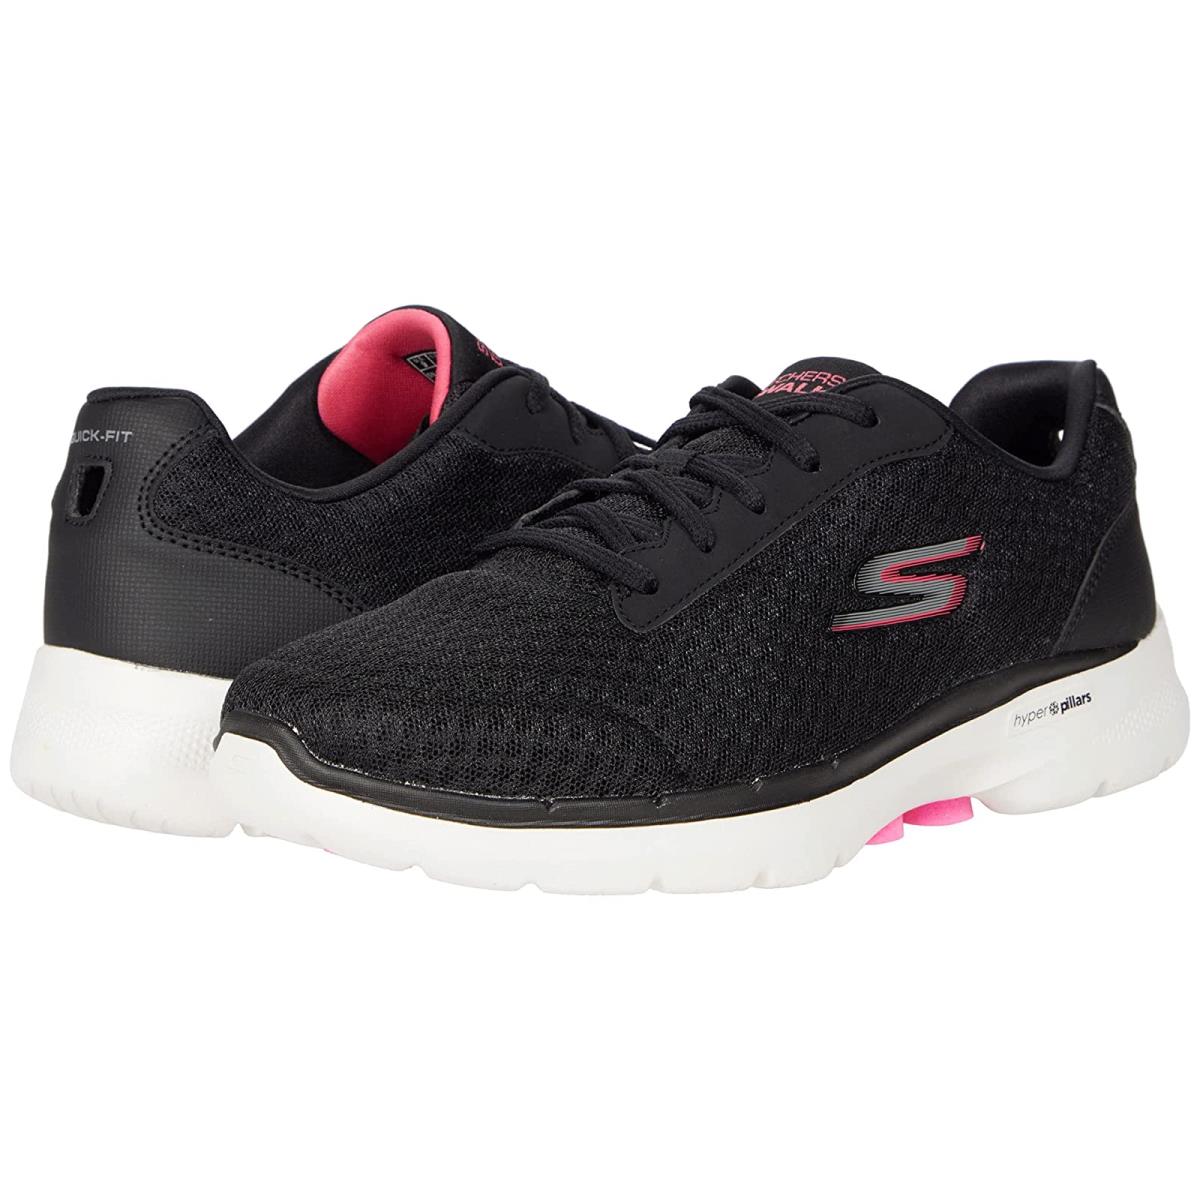 Woman`s Shoes Skechers Performance Go Walk 6 Iconic Vision Black/Hot Pink